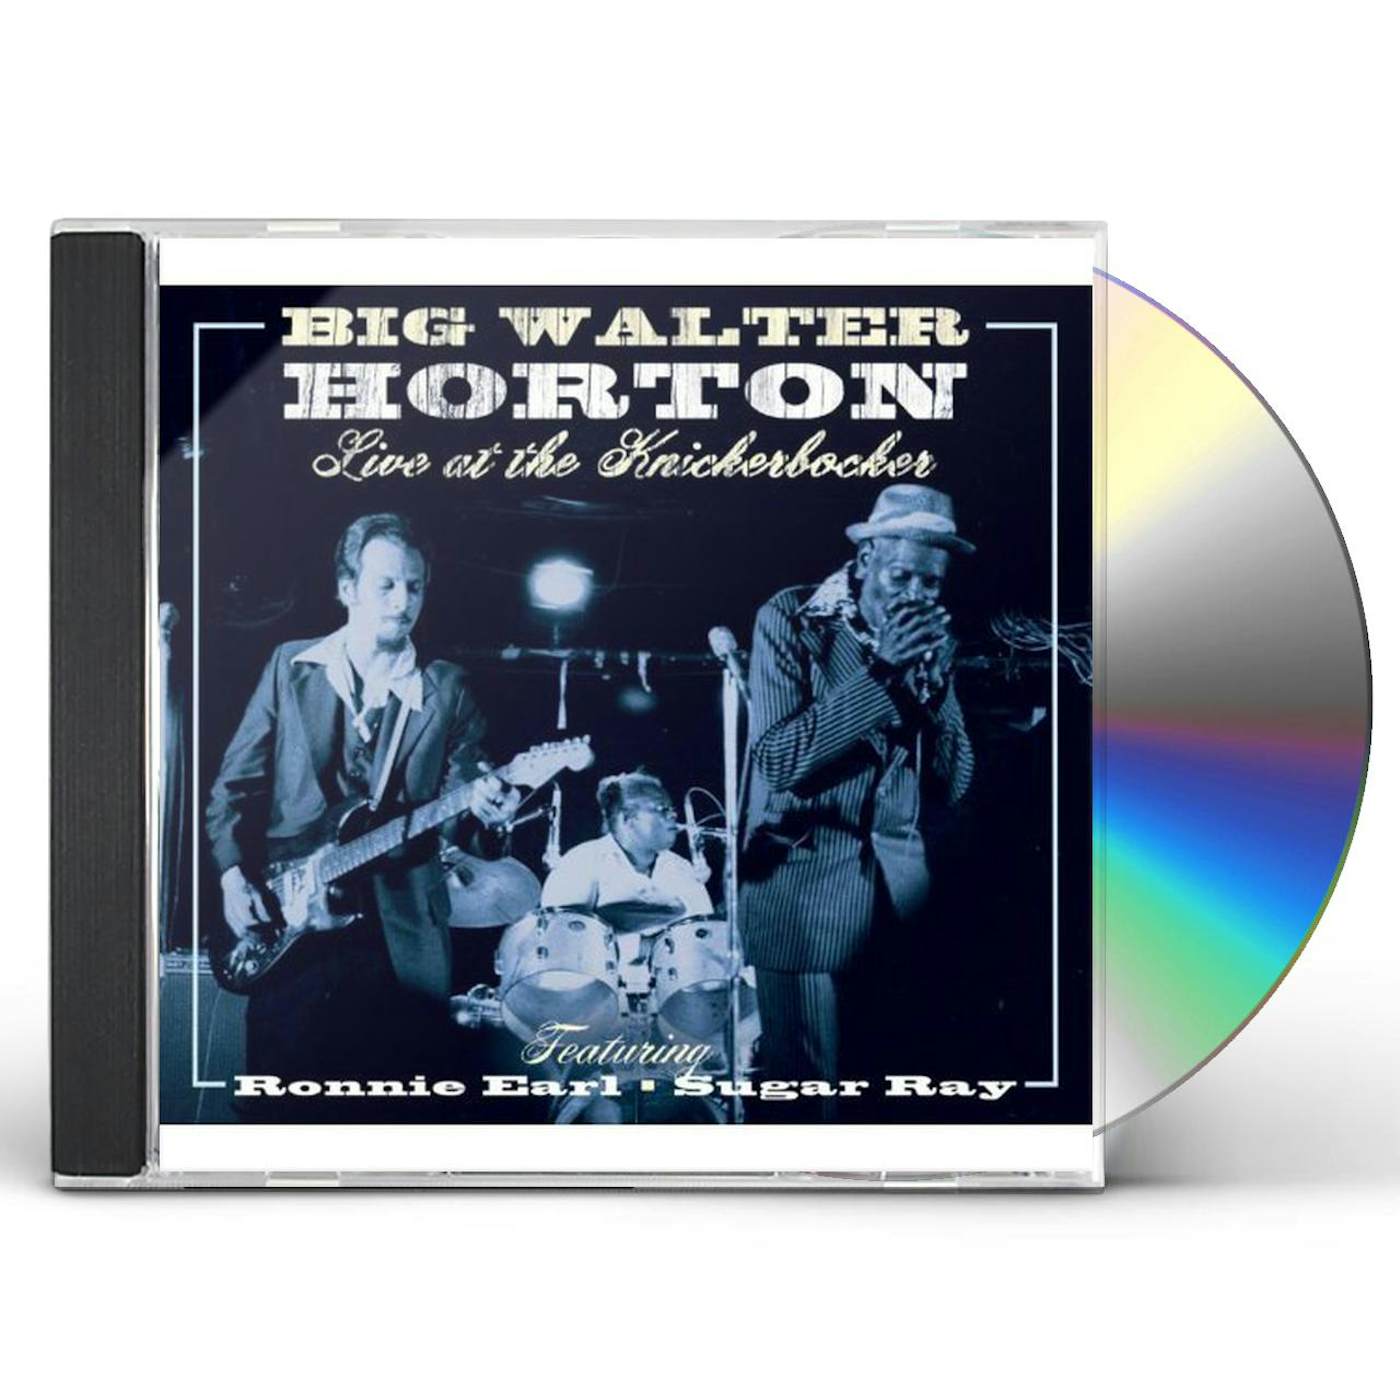 Walter Horton LIVE AT THE KNICKERBOCKER FEATURING RONNIE EARL CD